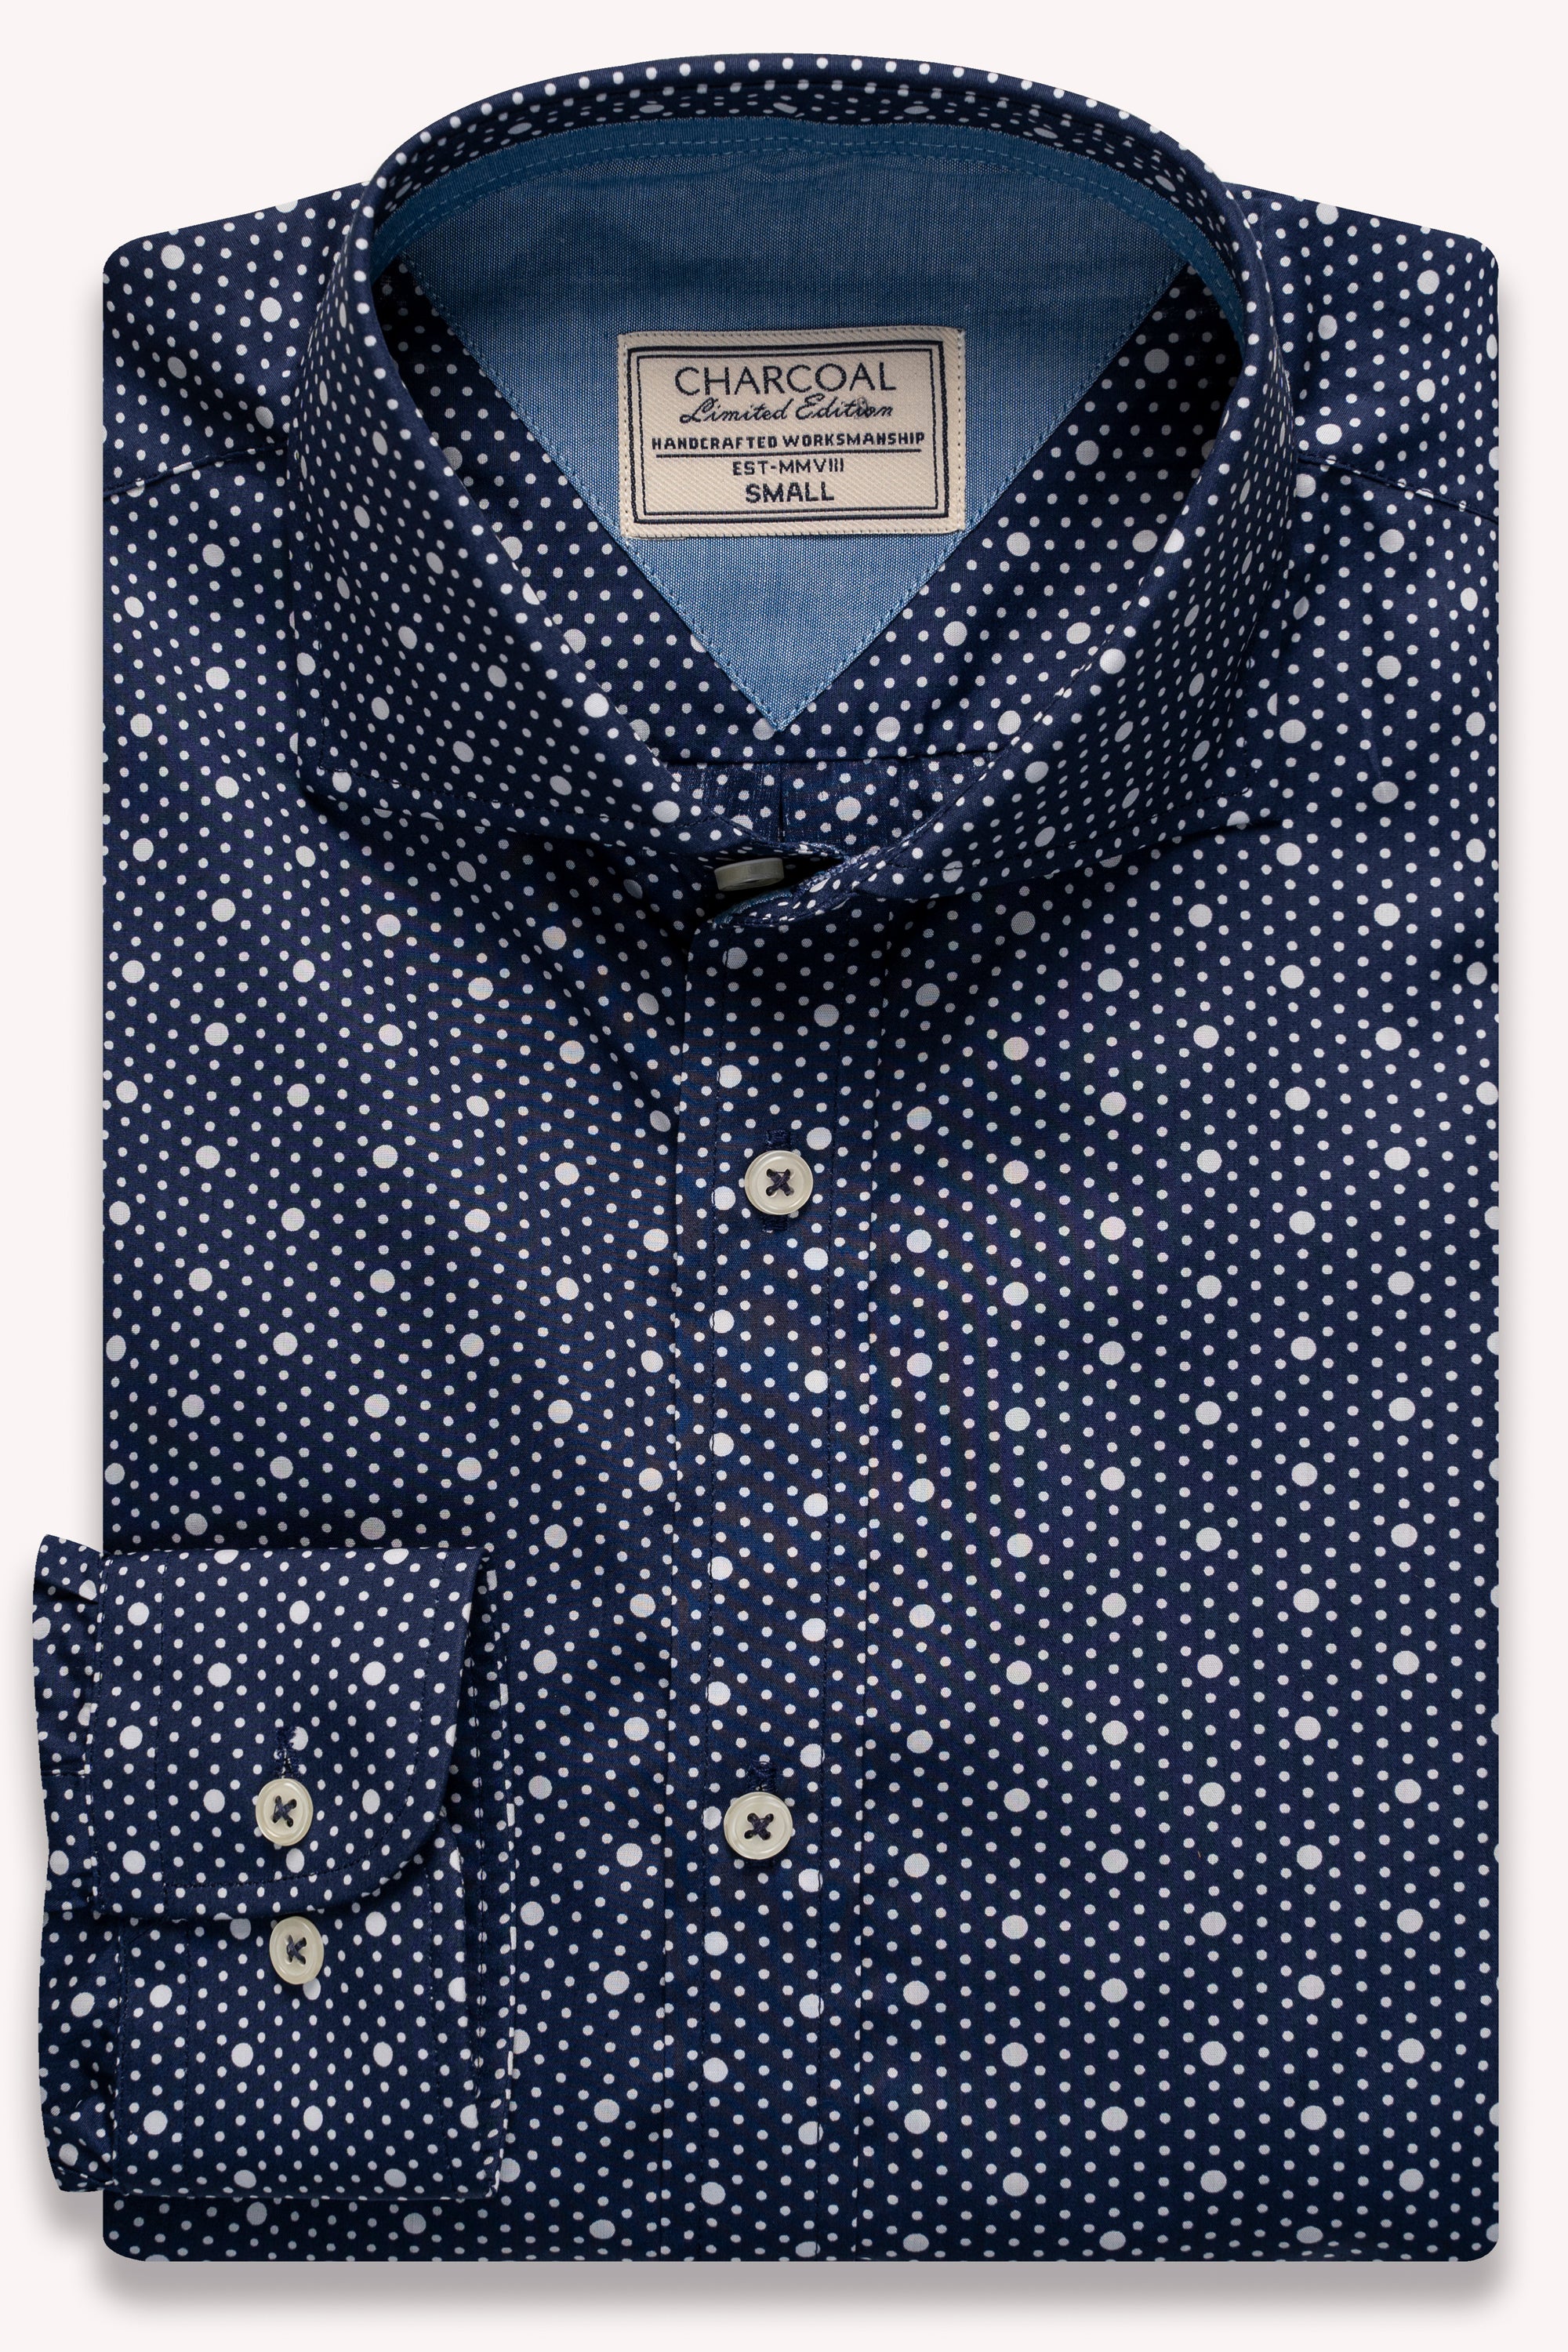 LIMITED EDITION SHIRT NAVY